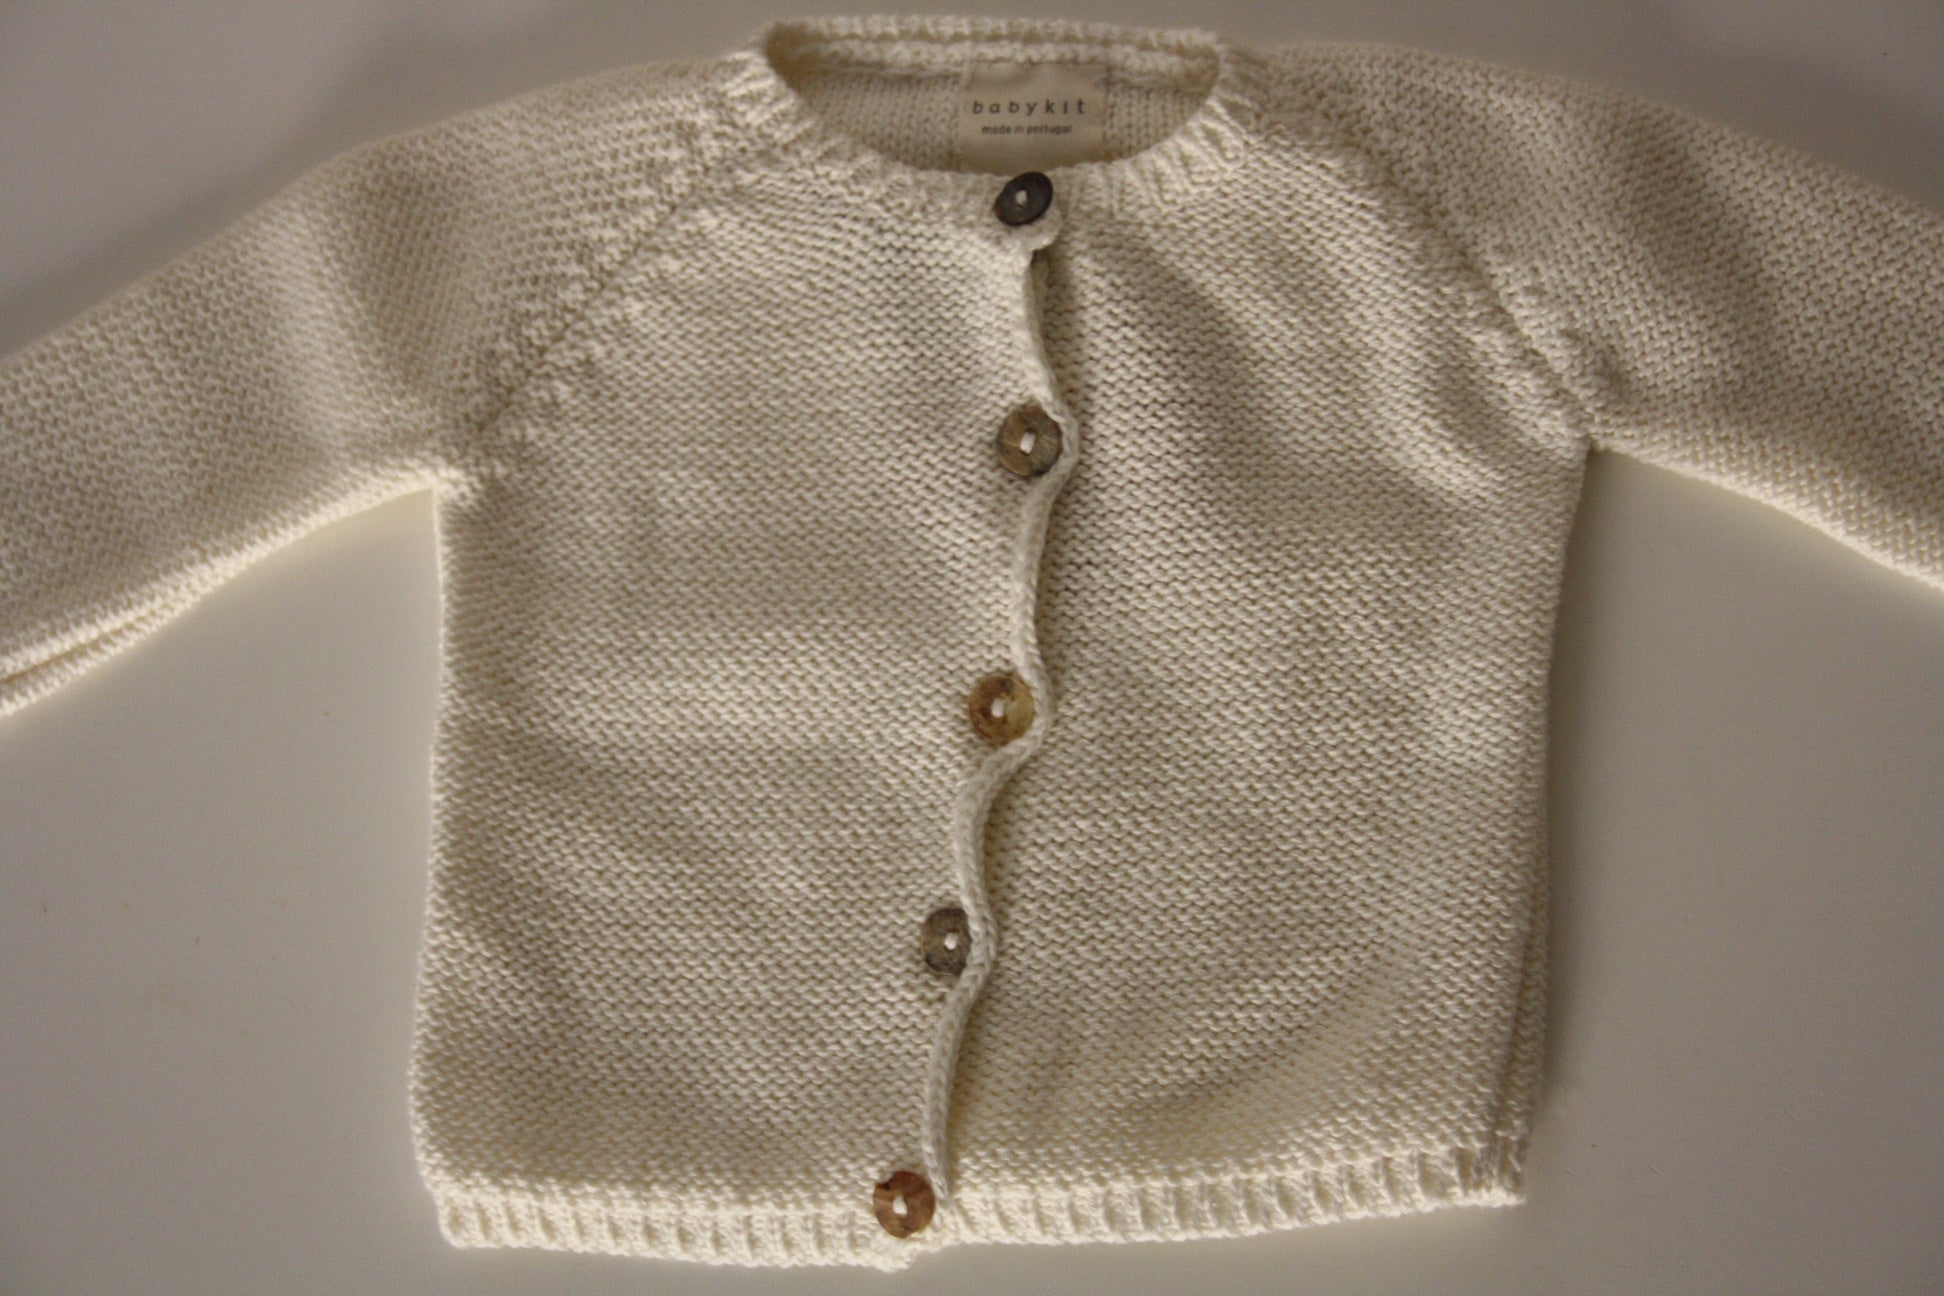 Spring/summer knitted Cotton Cardigan